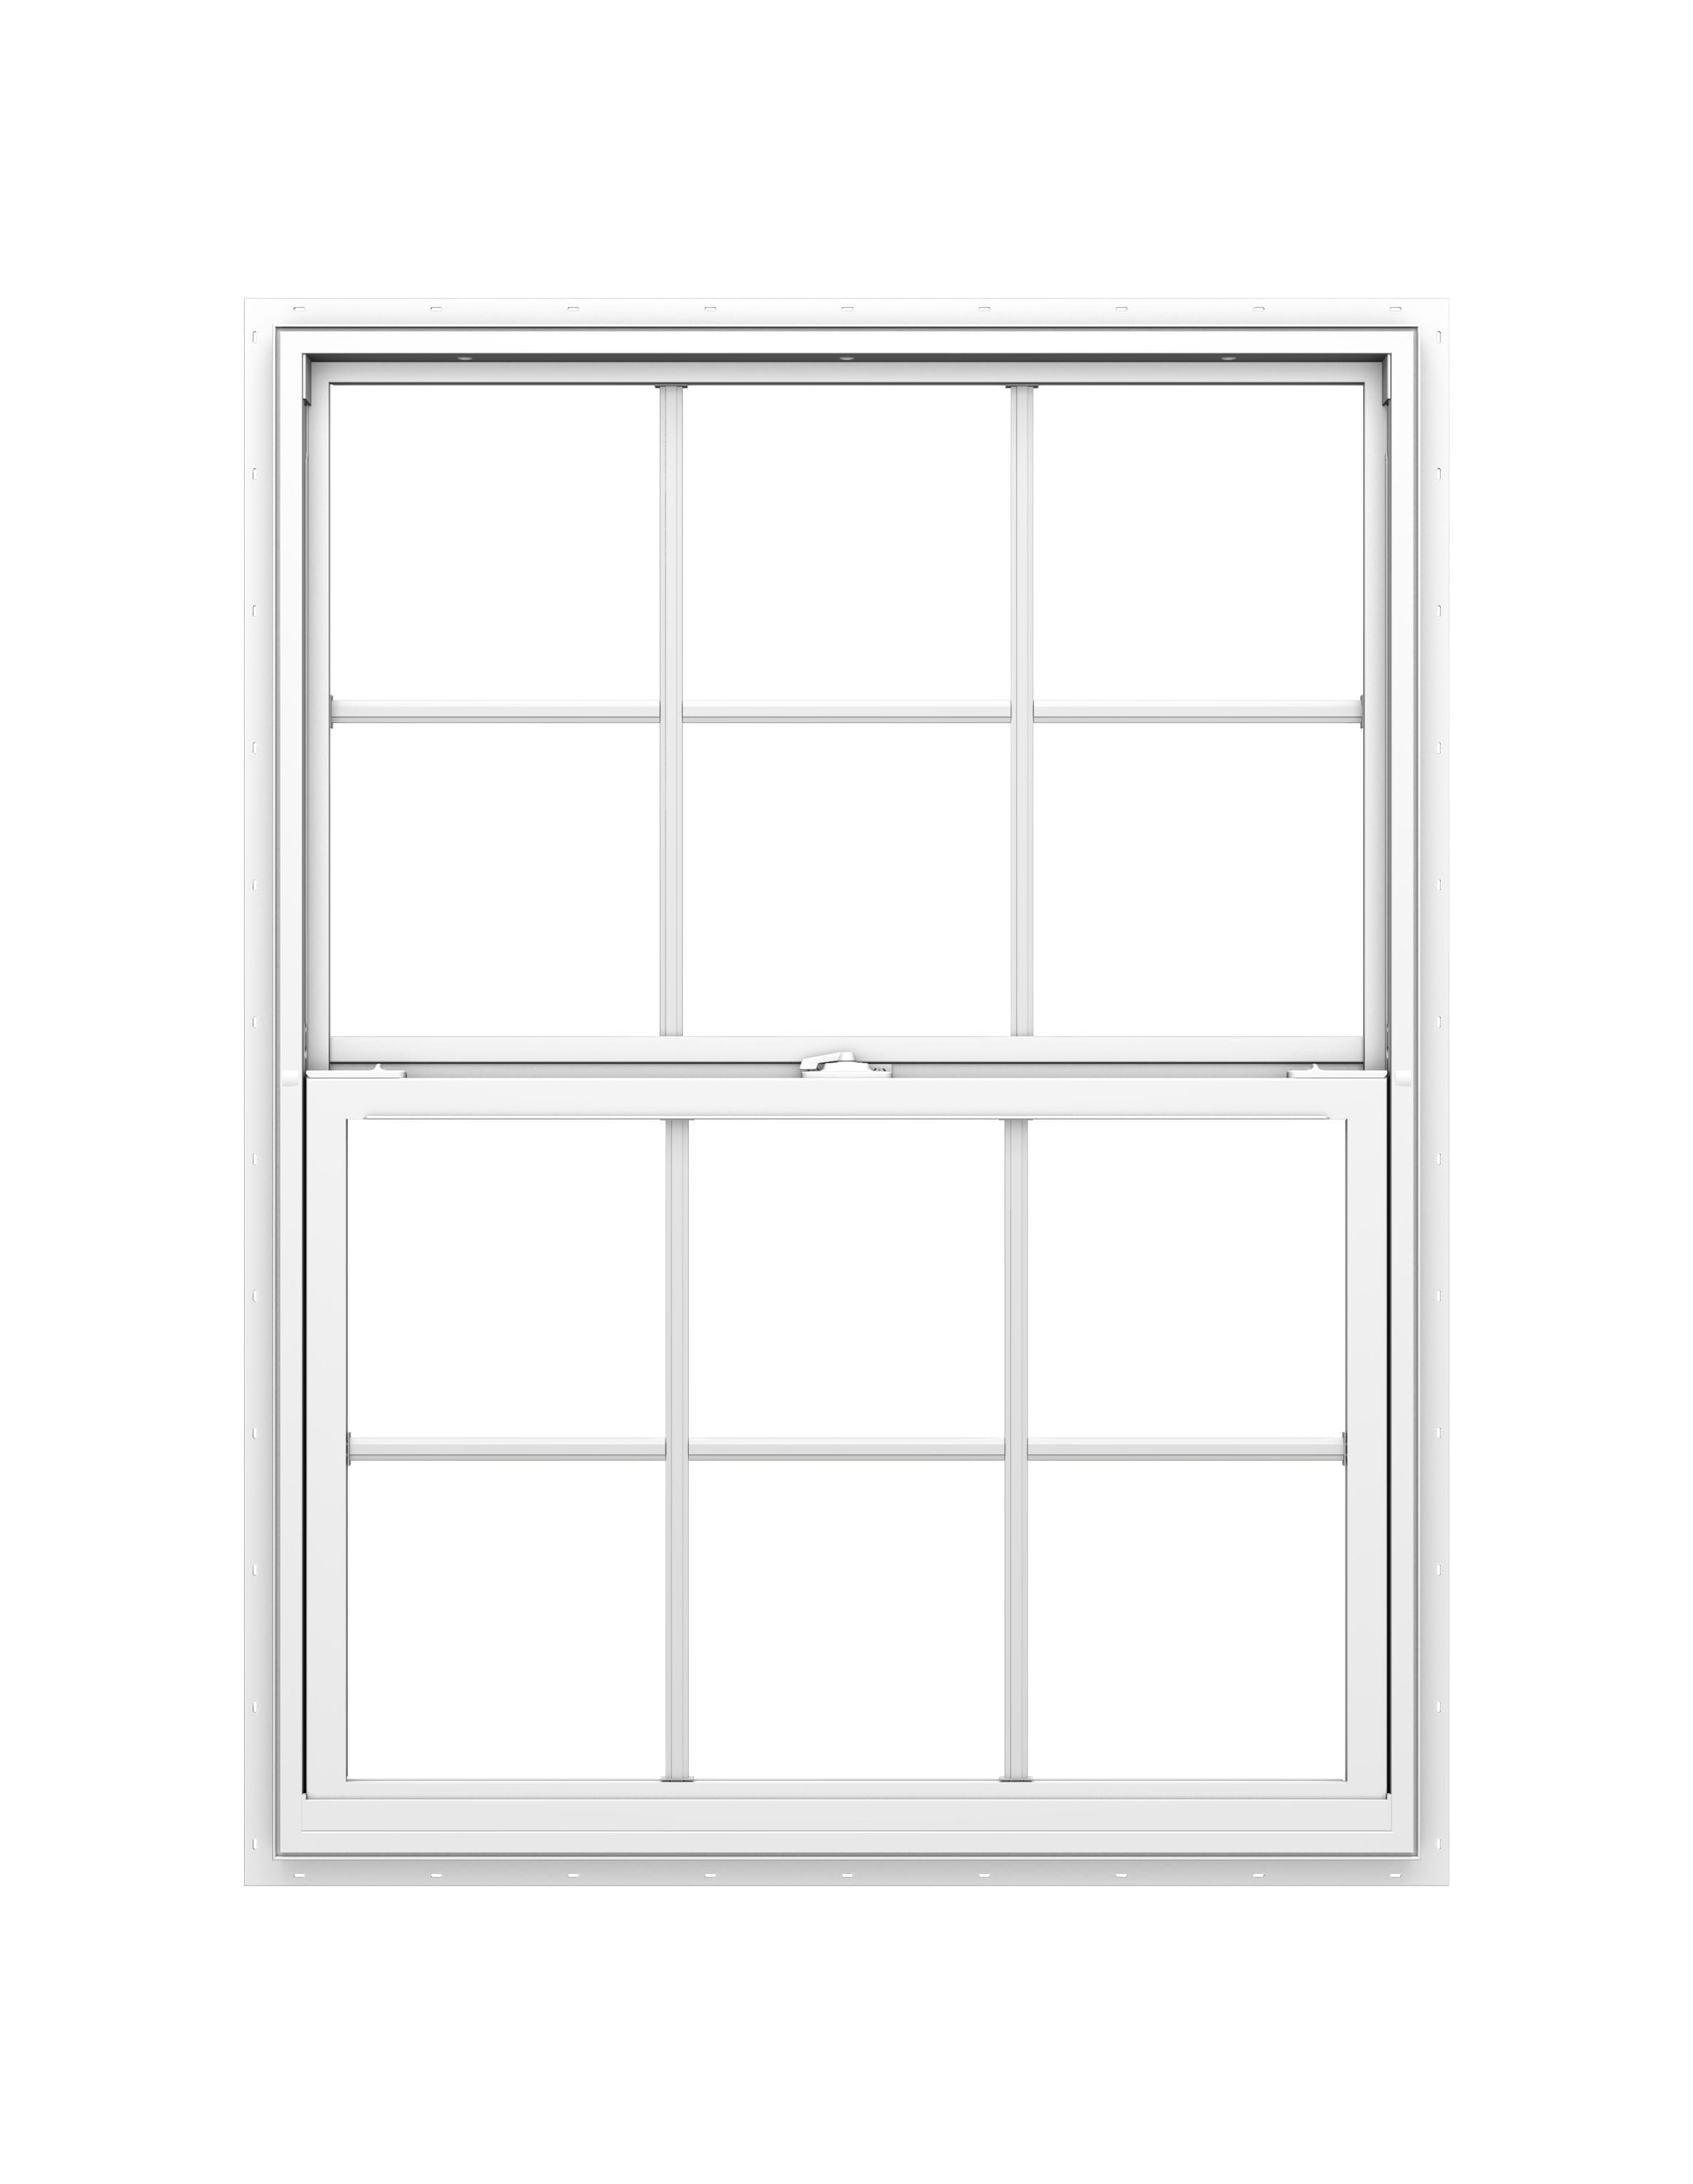 Pella 150 Series New Construction 23.5-in x 35.5-in x 2.6875-in Jamb White Vinyl Dual-pane Single Hung Window with Grids Half Screen Included -  1000009490